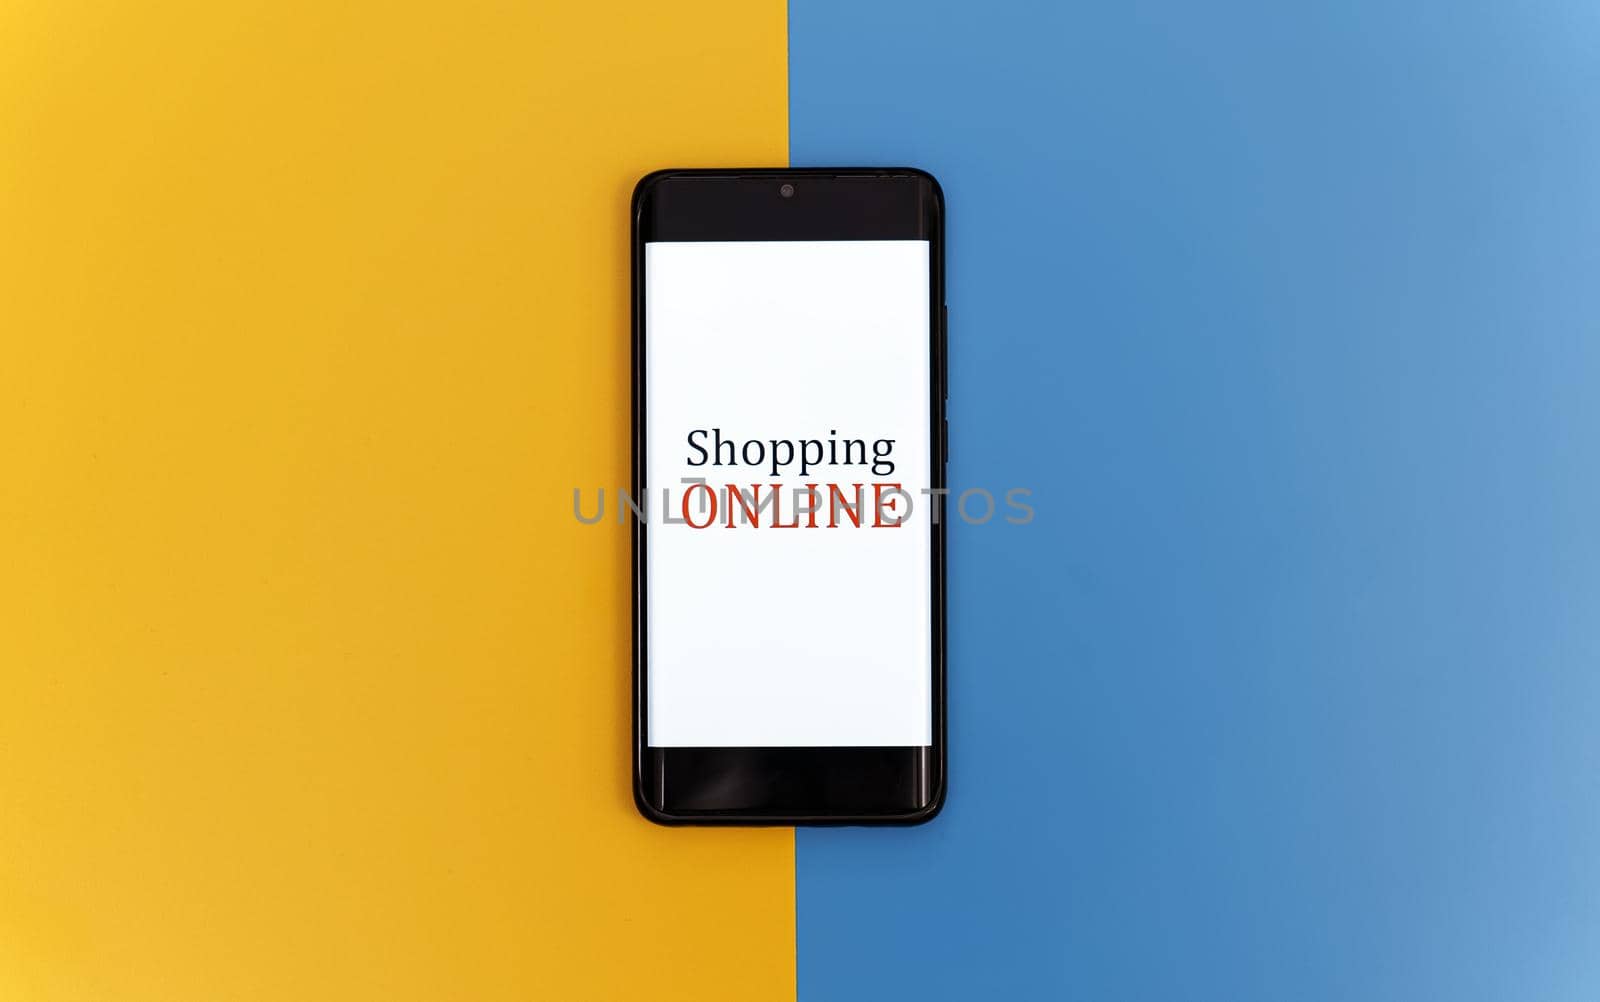 Smartphone on yellow and blue background. Online shopping concept.